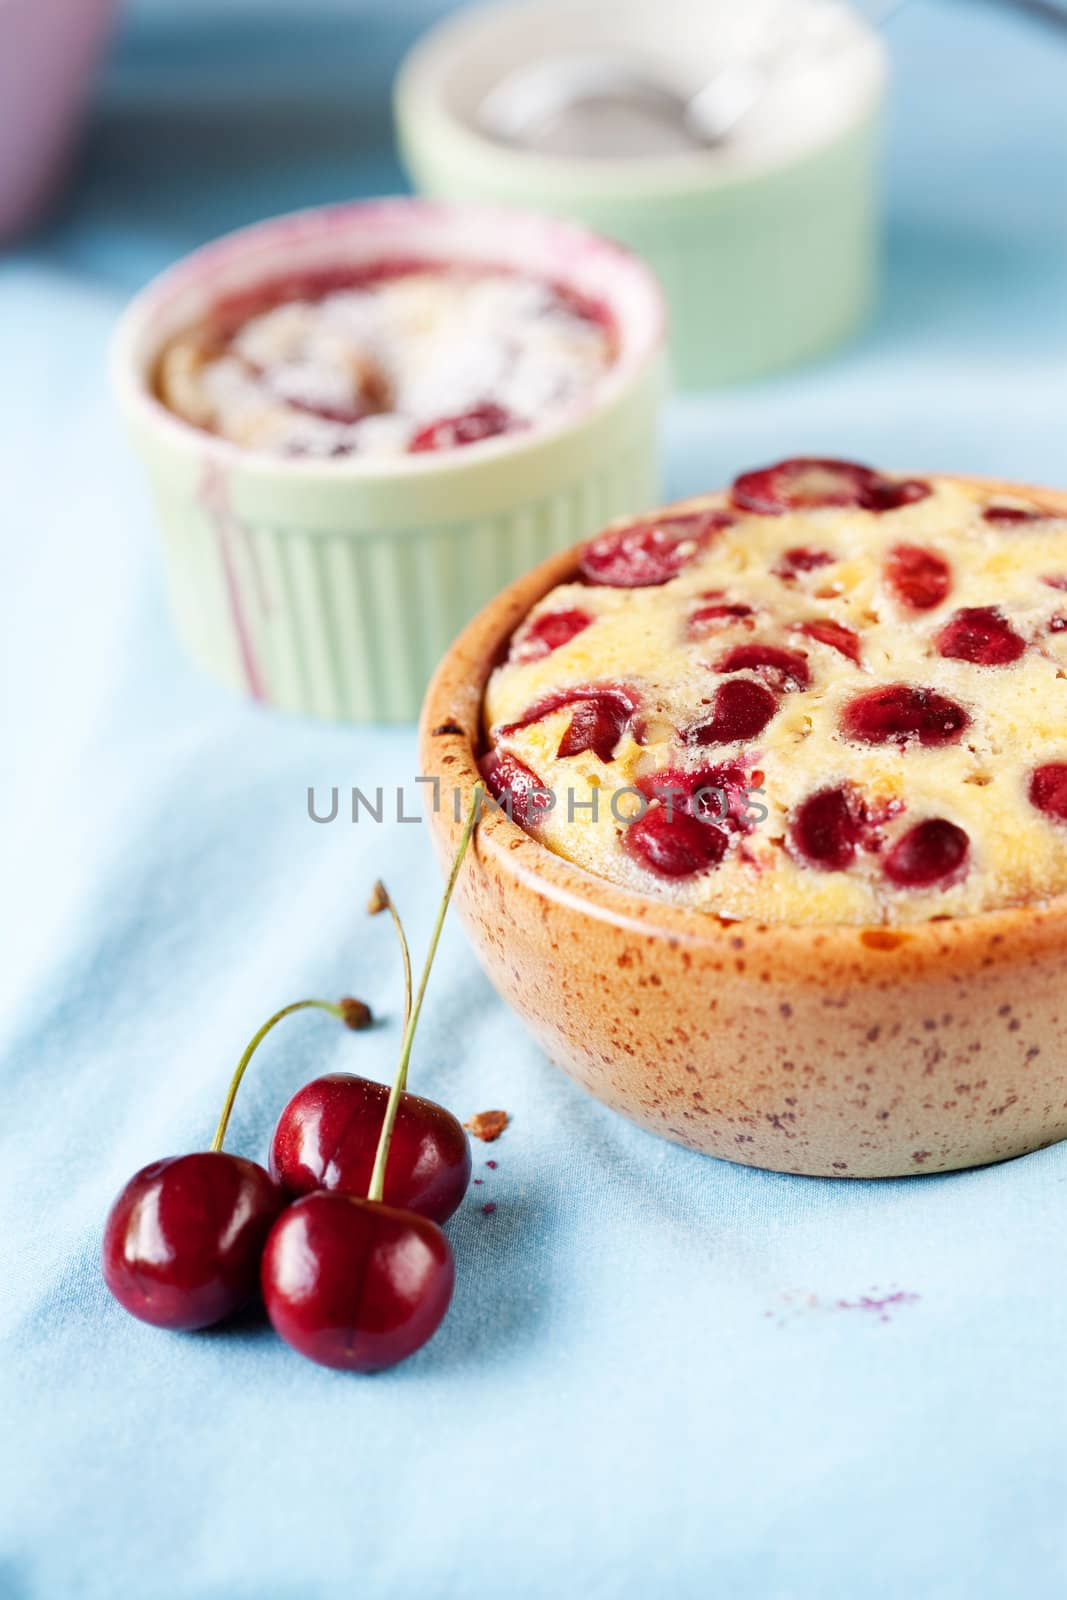 Delicious cherry clafoutis freshly baked with cherries